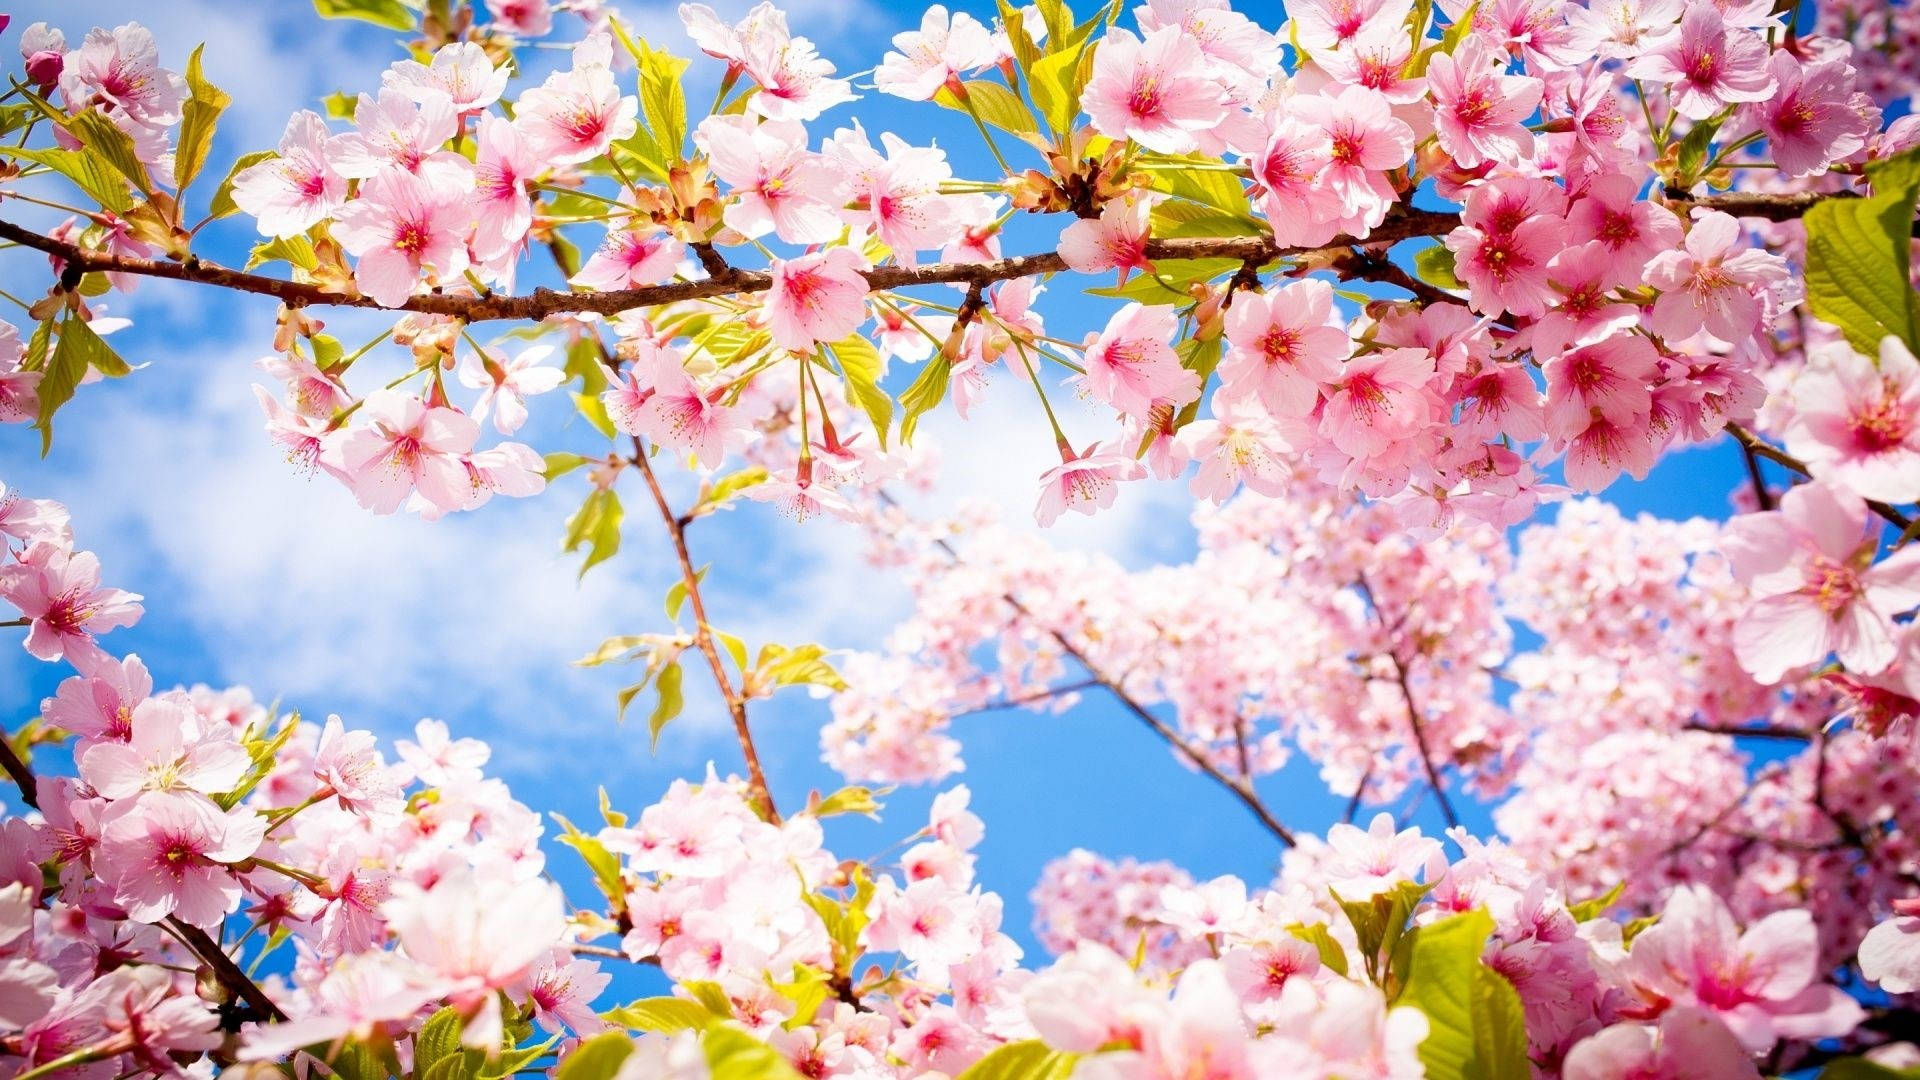 Image   Boost your business with Spring Computer Wallpaper